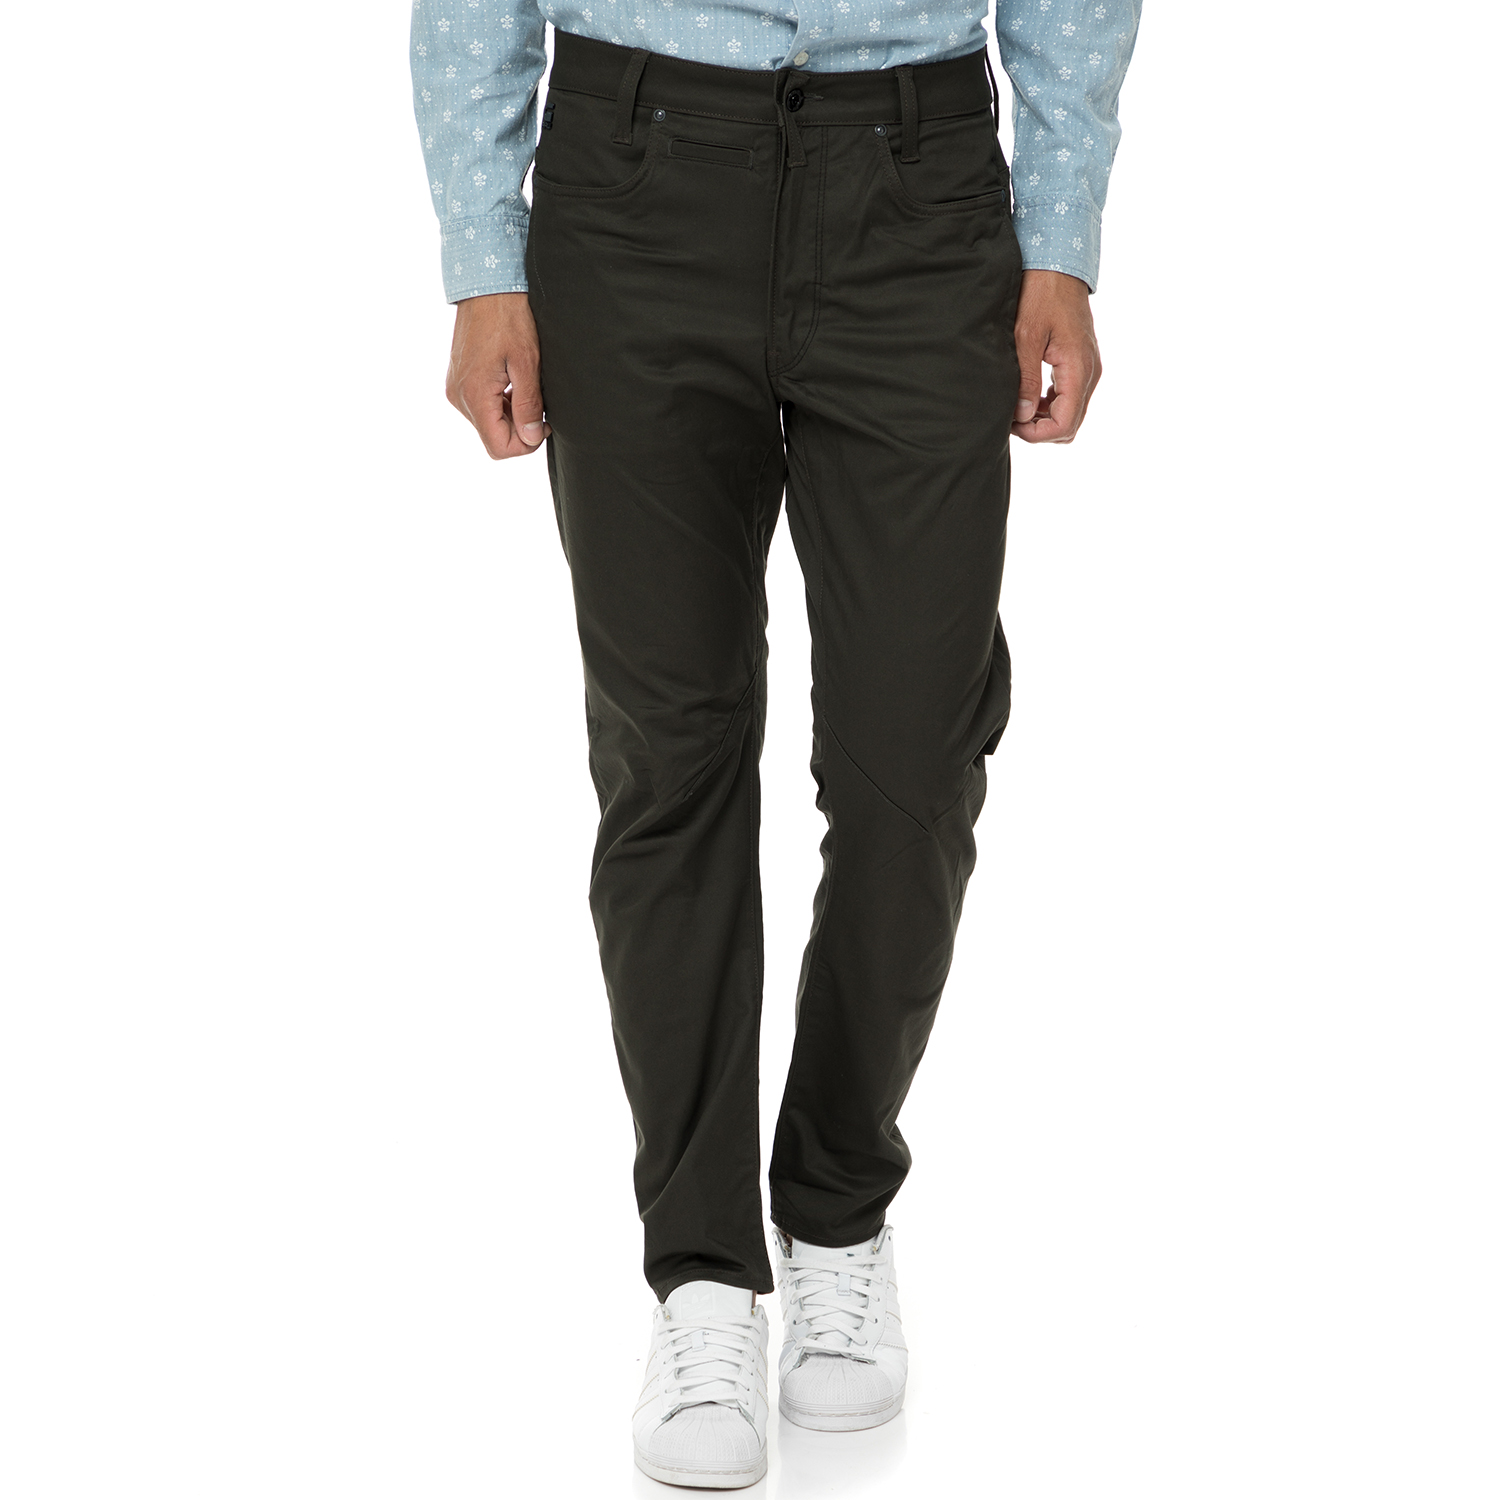 G-STAR RAW Ανδρικό chino παντελόνι D-Staq 3D Tapered ανθρακί